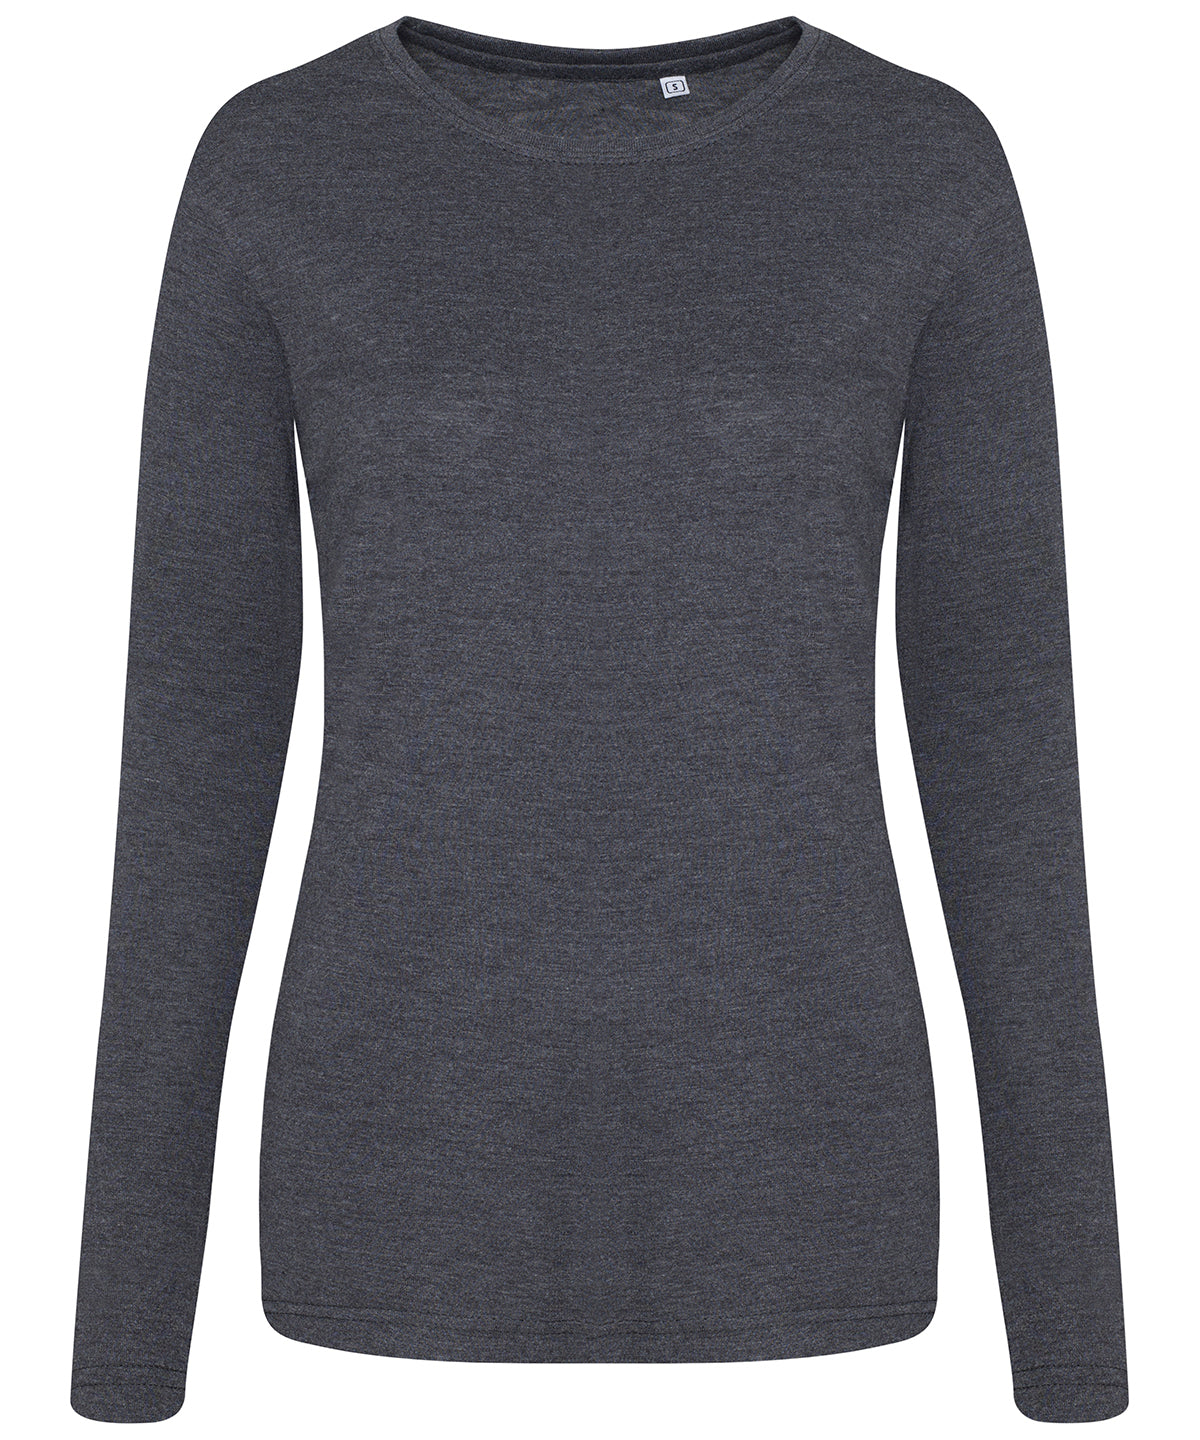 Personalised T-Shirts - Dark Grey AWDis Just T's Women's triblend T long sleeve